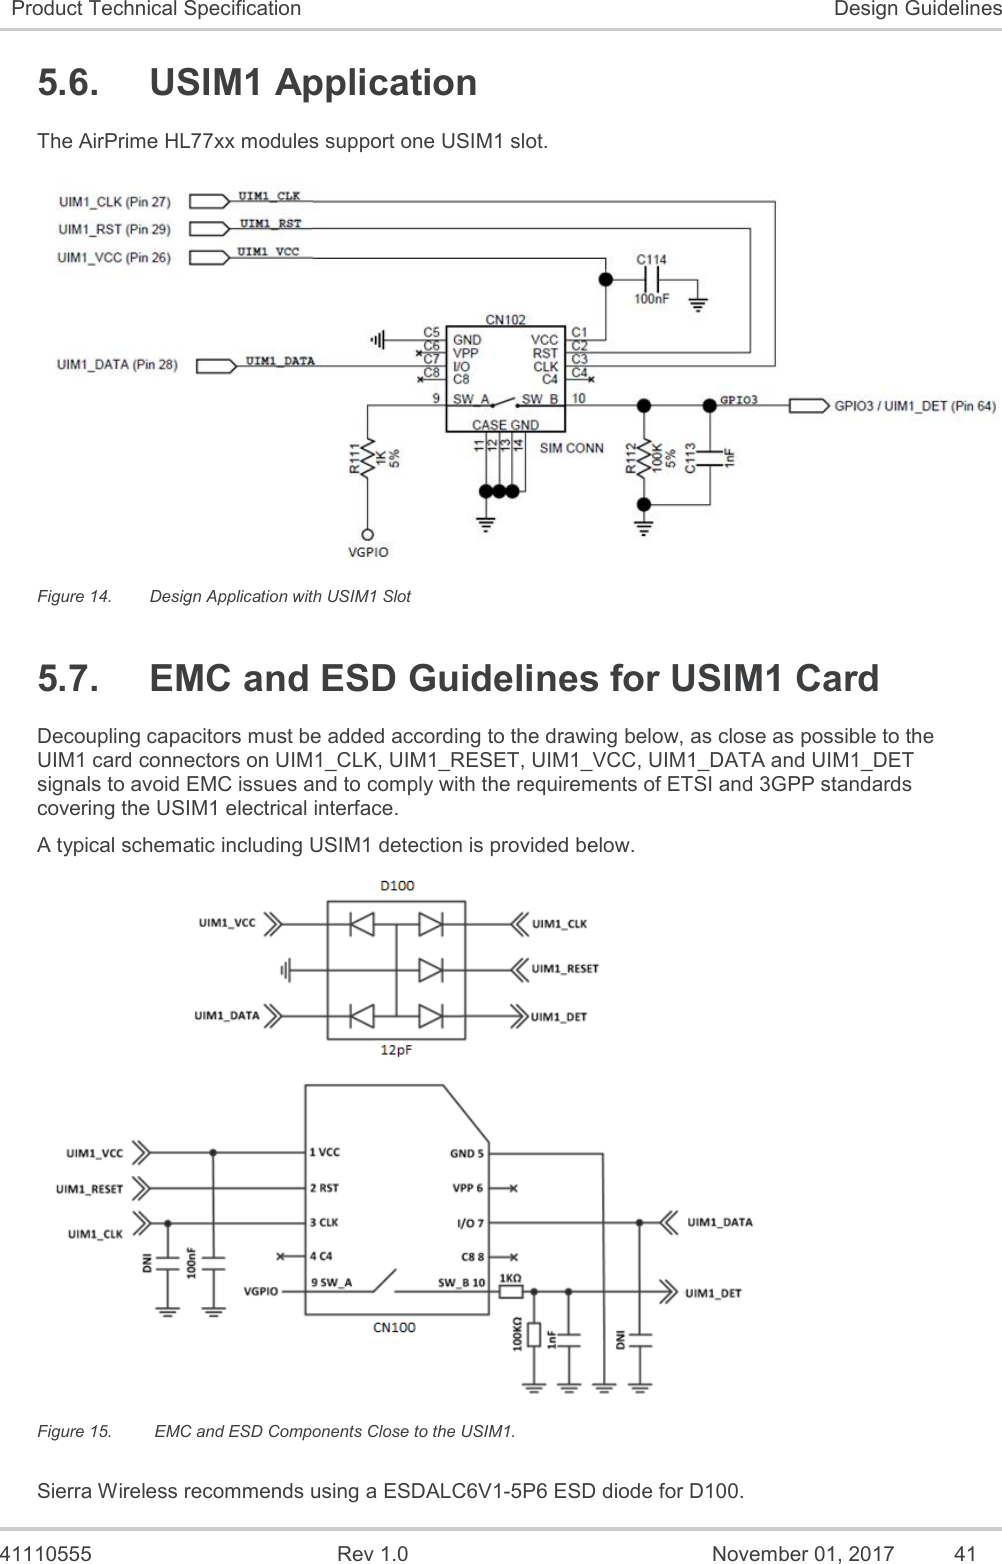   41110555  Rev 1.0  November 01, 2017  41 Product Technical Specification Design Guidelines 5.6.  USIM1 Application The AirPrime HL77xx modules support one USIM1 slot.   Figure 14.  Design Application with USIM1 Slot 5.7.  EMC and ESD Guidelines for USIM1 Card Decoupling capacitors must be added according to the drawing below, as close as possible to the UIM1 card connectors on UIM1_CLK, UIM1_RESET, UIM1_VCC, UIM1_DATA and UIM1_DET signals to avoid EMC issues and to comply with the requirements of ETSI and 3GPP standards covering the USIM1 electrical interface. A typical schematic including USIM1 detection is provided below.  Figure 15.   EMC and ESD Components Close to the USIM1. Sierra Wireless recommends using a ESDALC6V1-5P6 ESD diode for D100. 